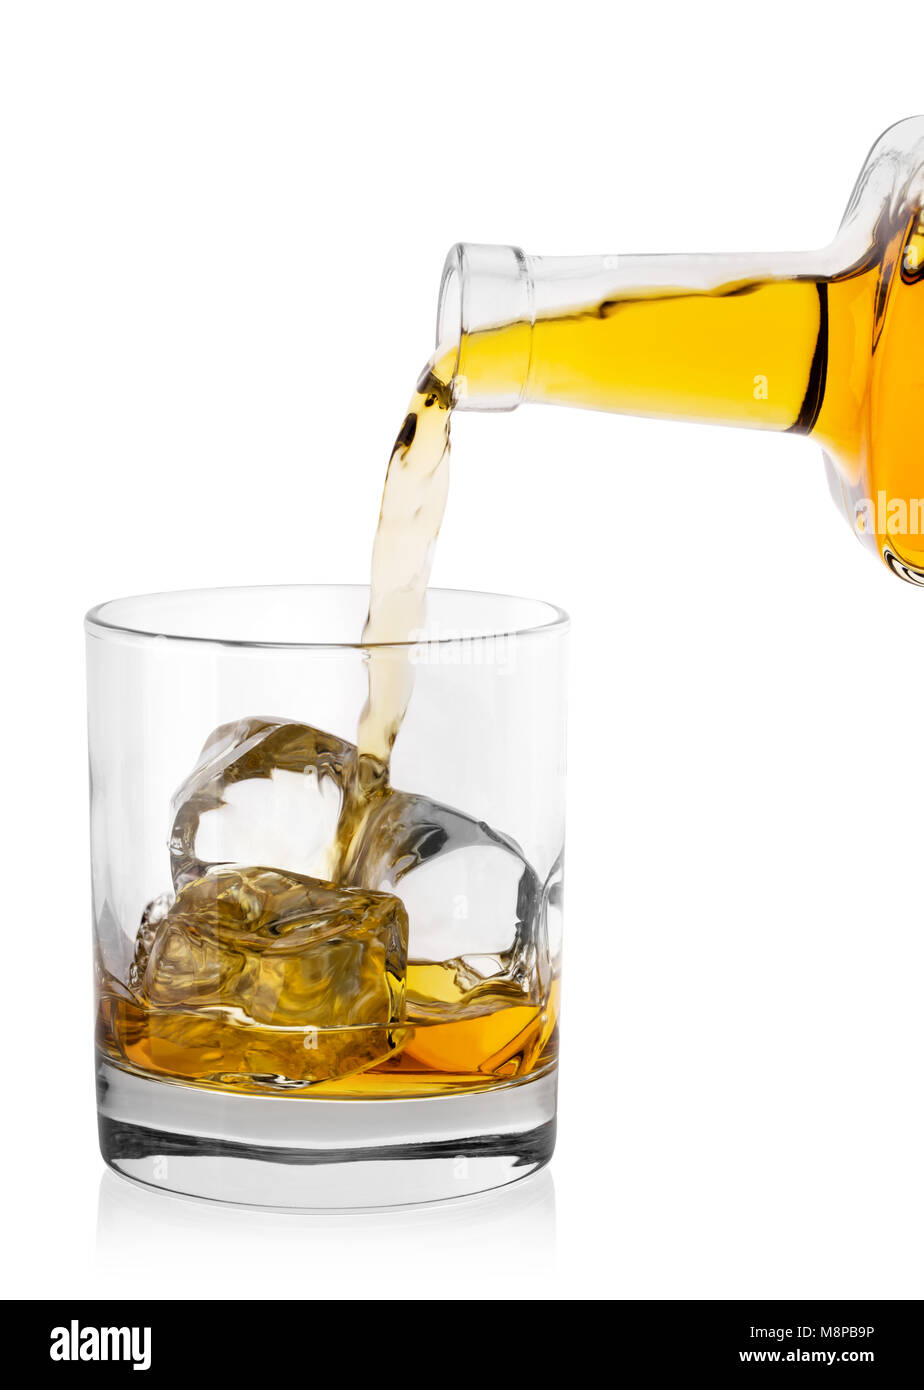 https://c8.alamy.com/comp/M8PB9P/whiskey-pours-from-bottle-in-round-glass-with-ice-M8PB9P.jpg